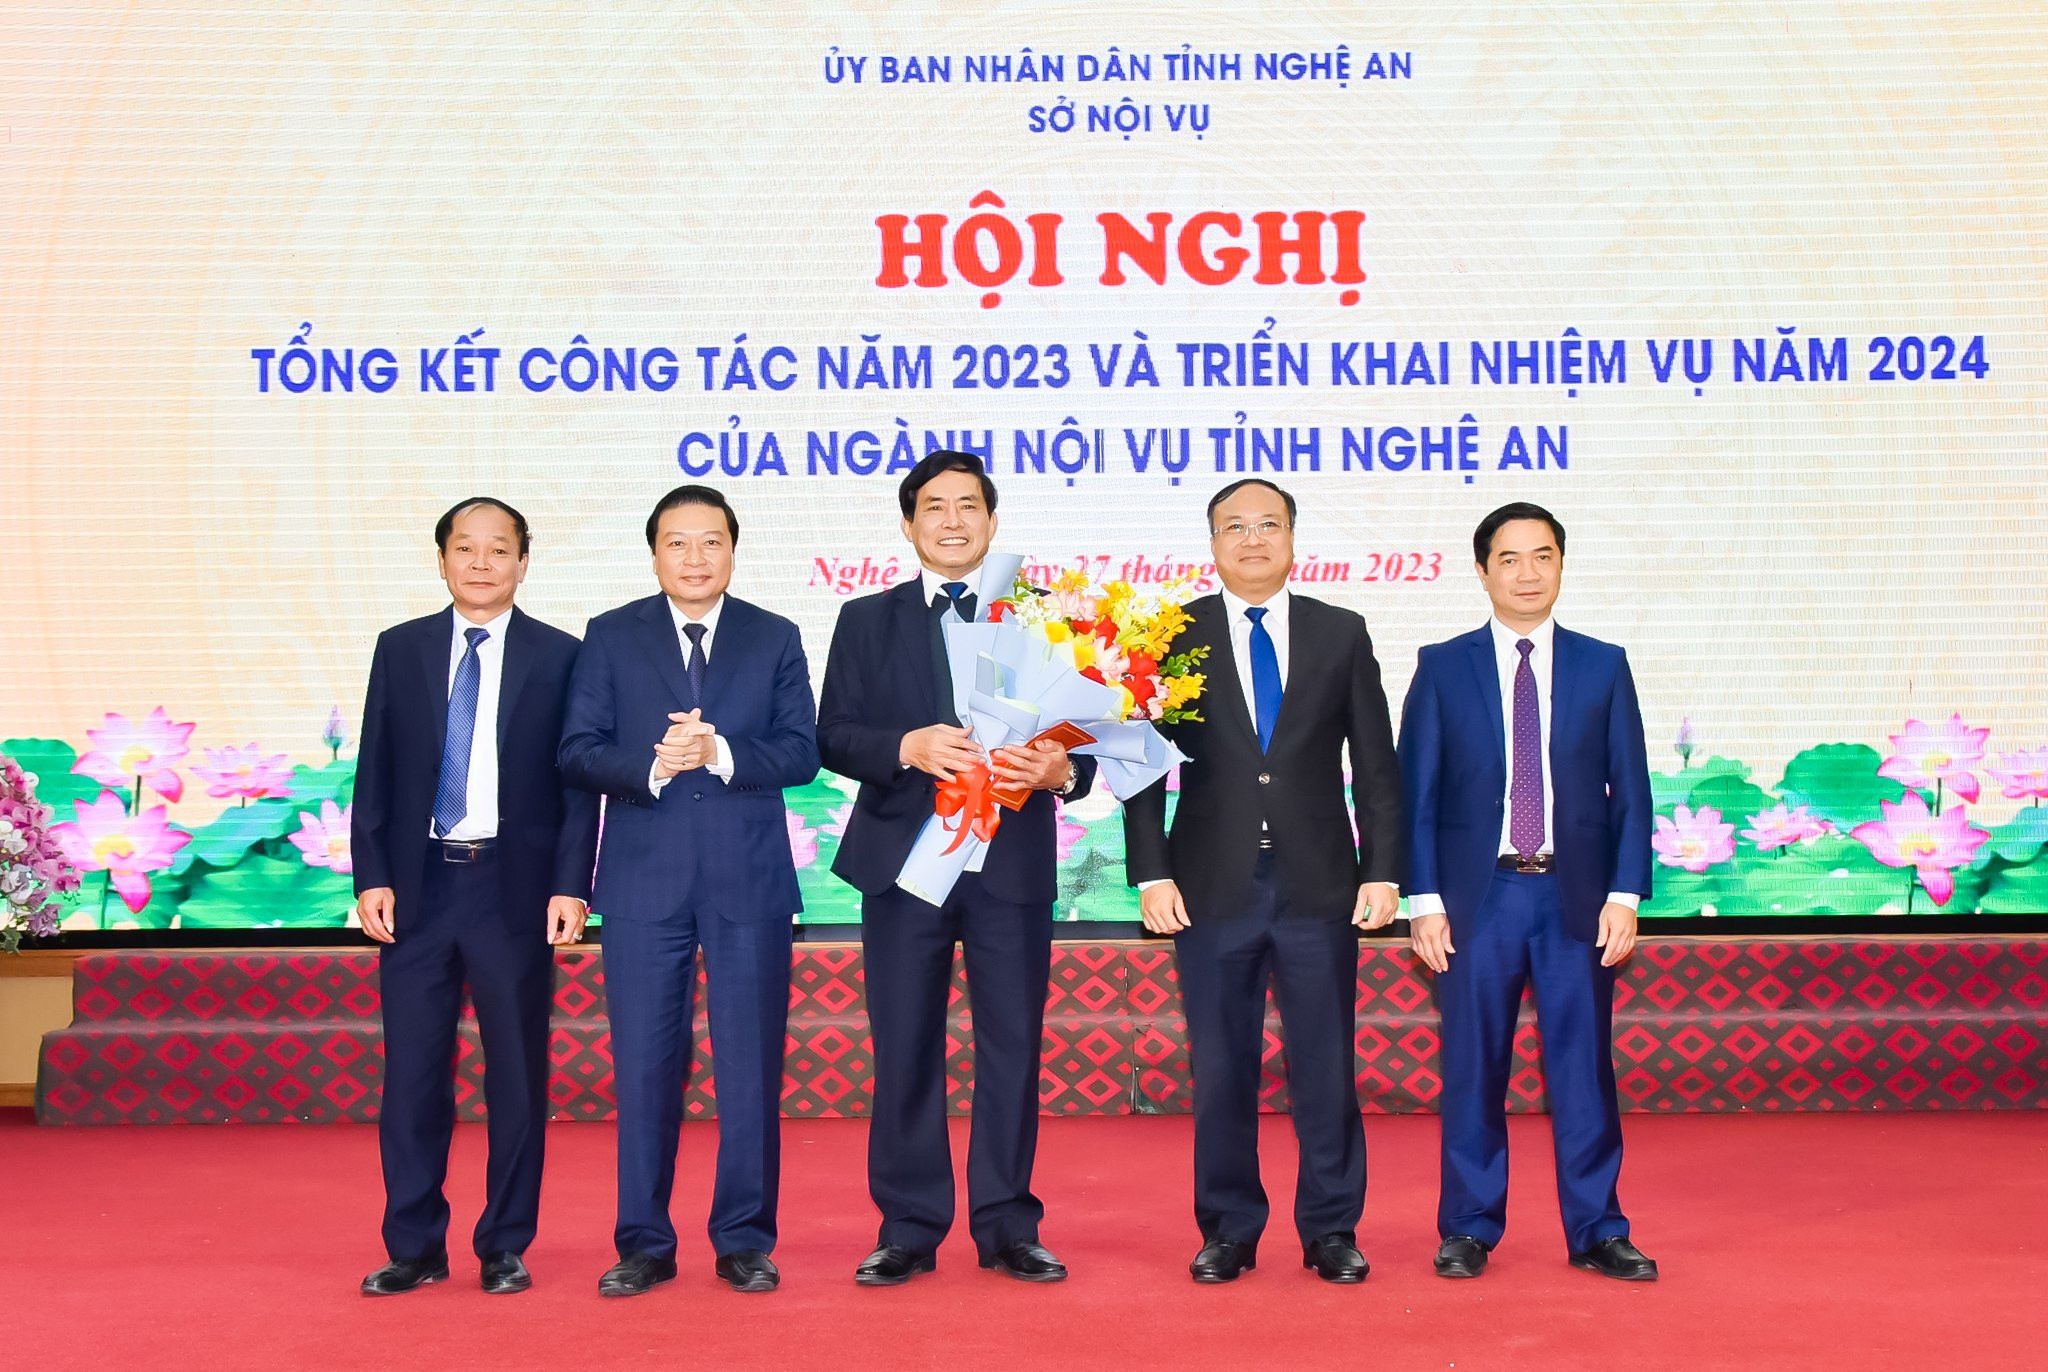 bna-trao-3-anh-thanh-le-1138.jpg